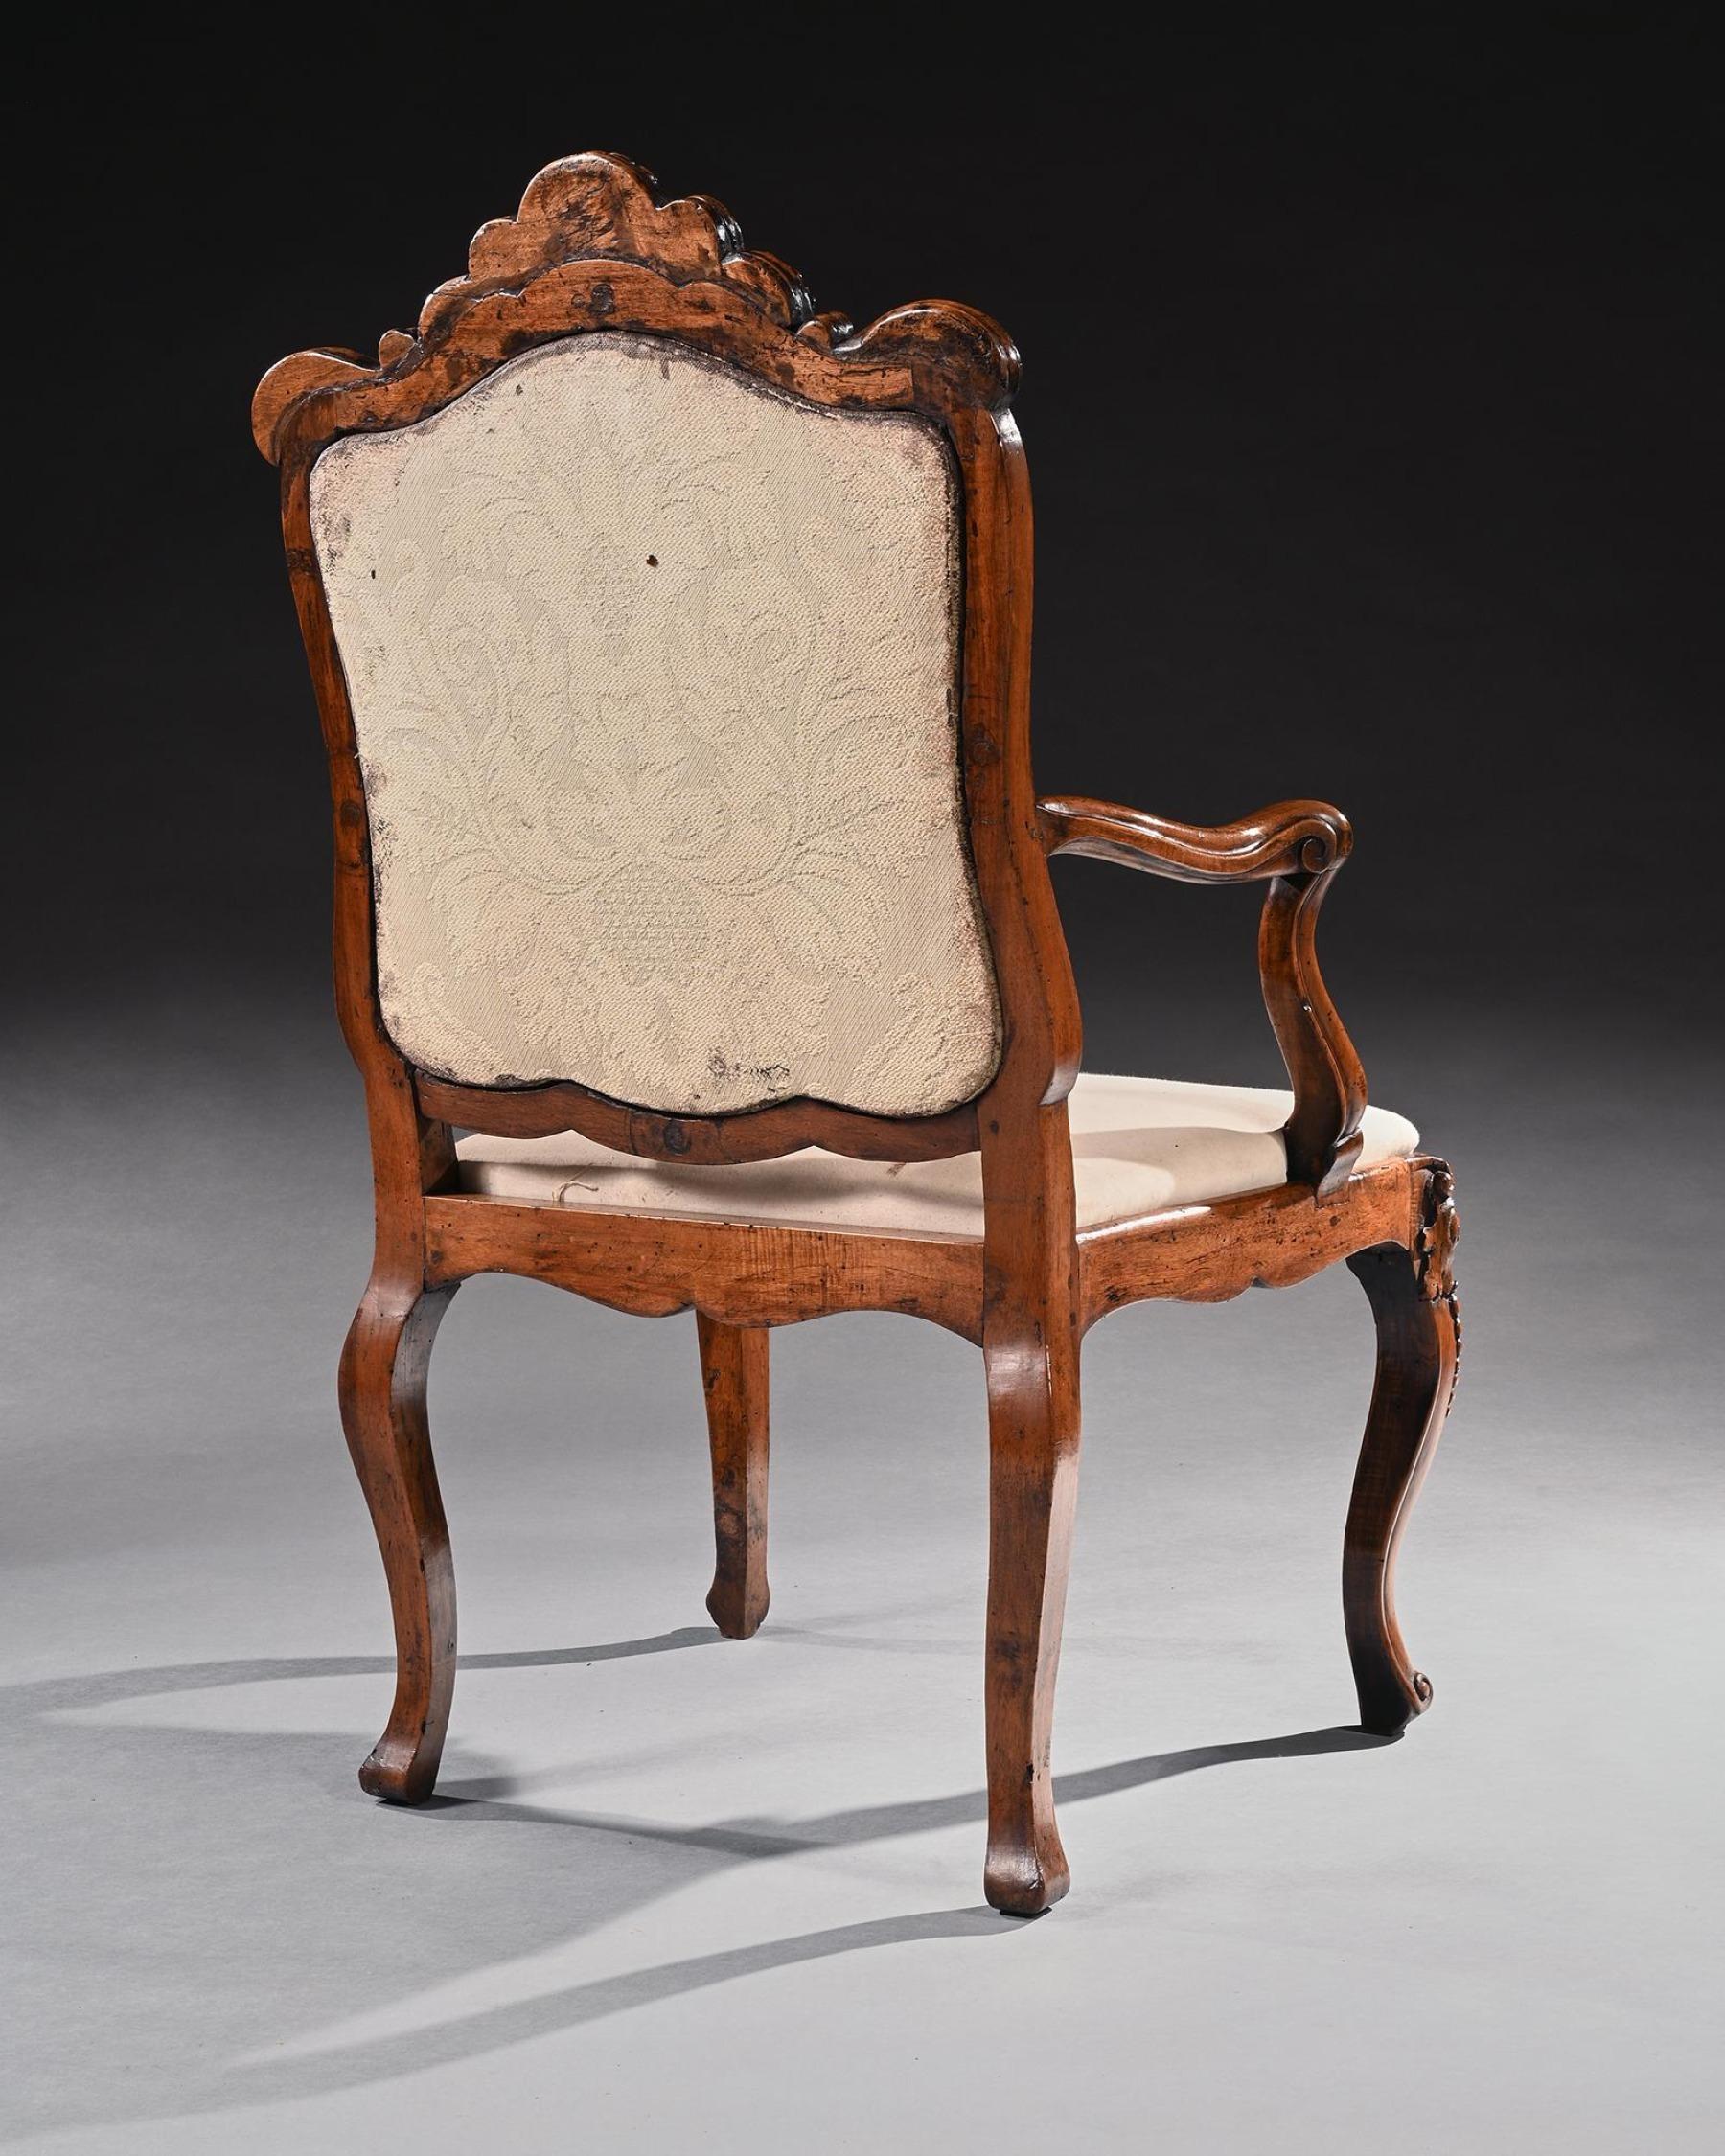 Mid 18th Century Italian Rococo Armchair in Walnut With Extravagantly Carved For Sale 1